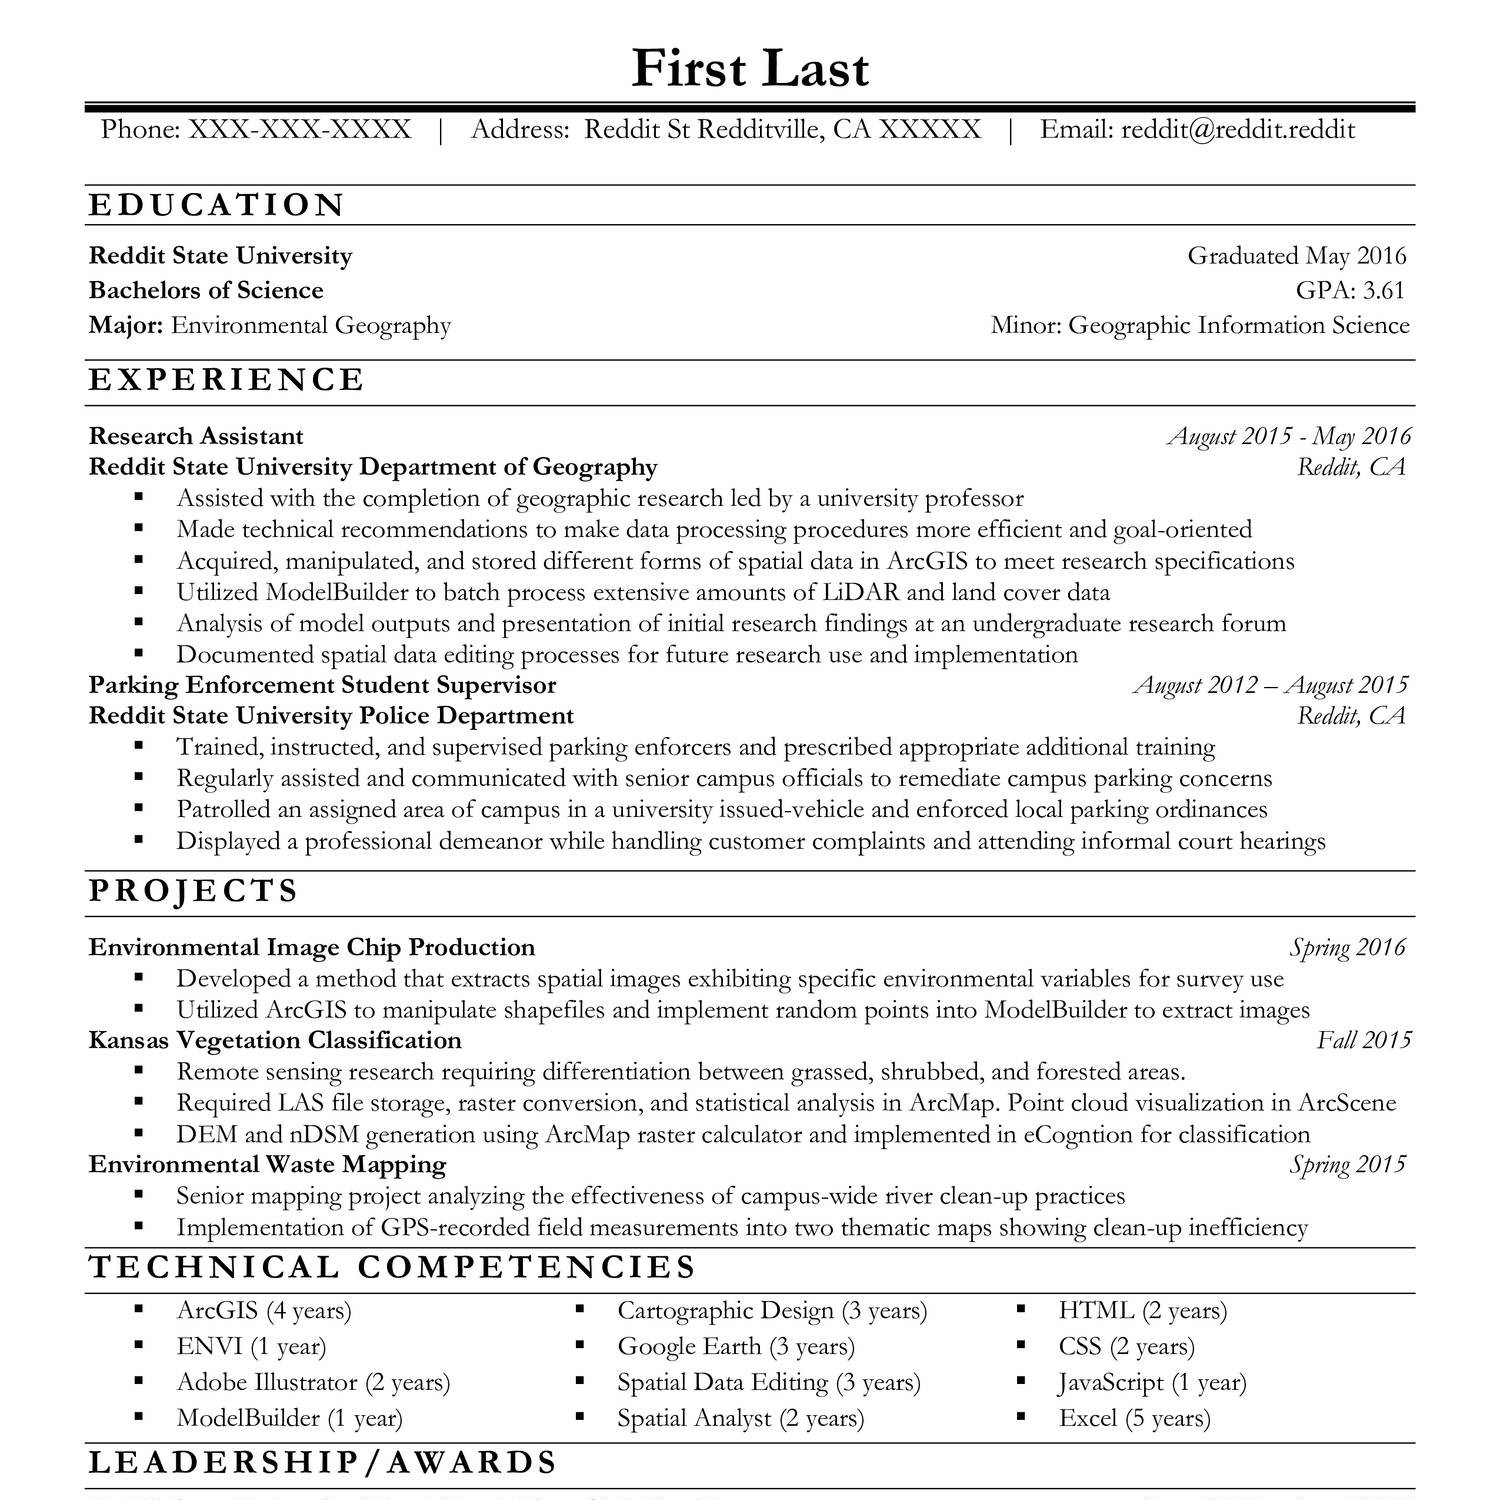 how to write a good resume reddit